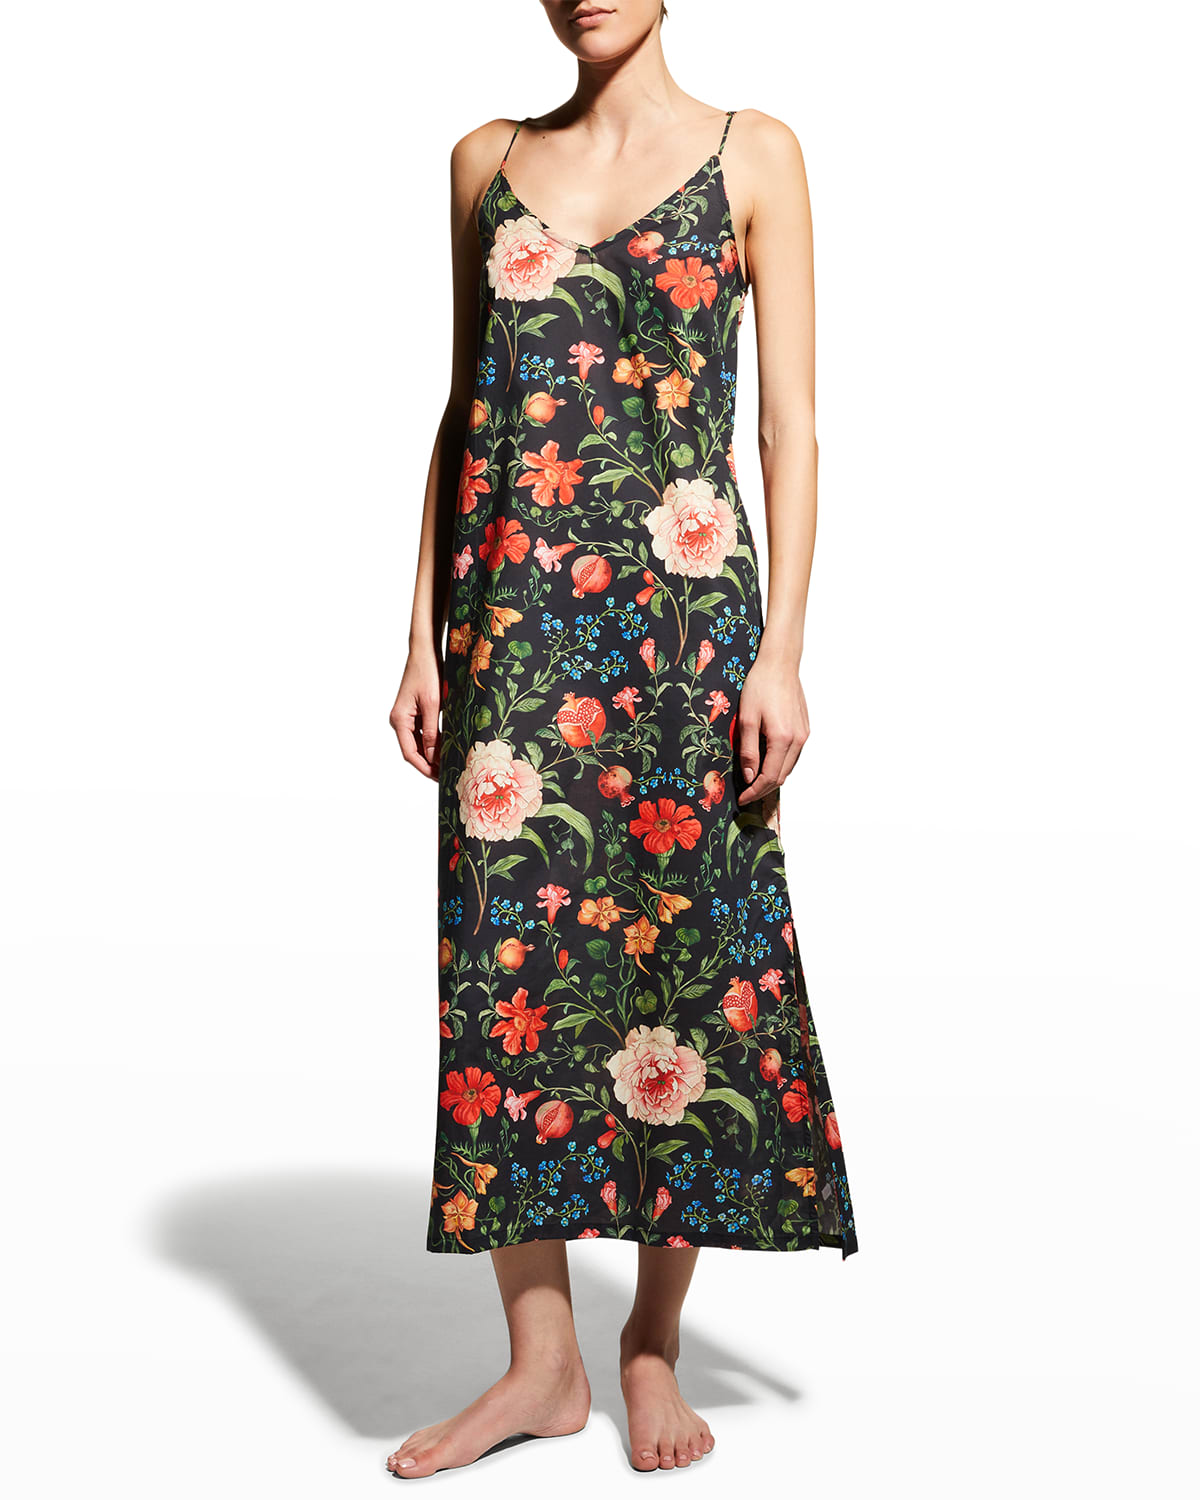 Persephone Floral-Print Nightgown